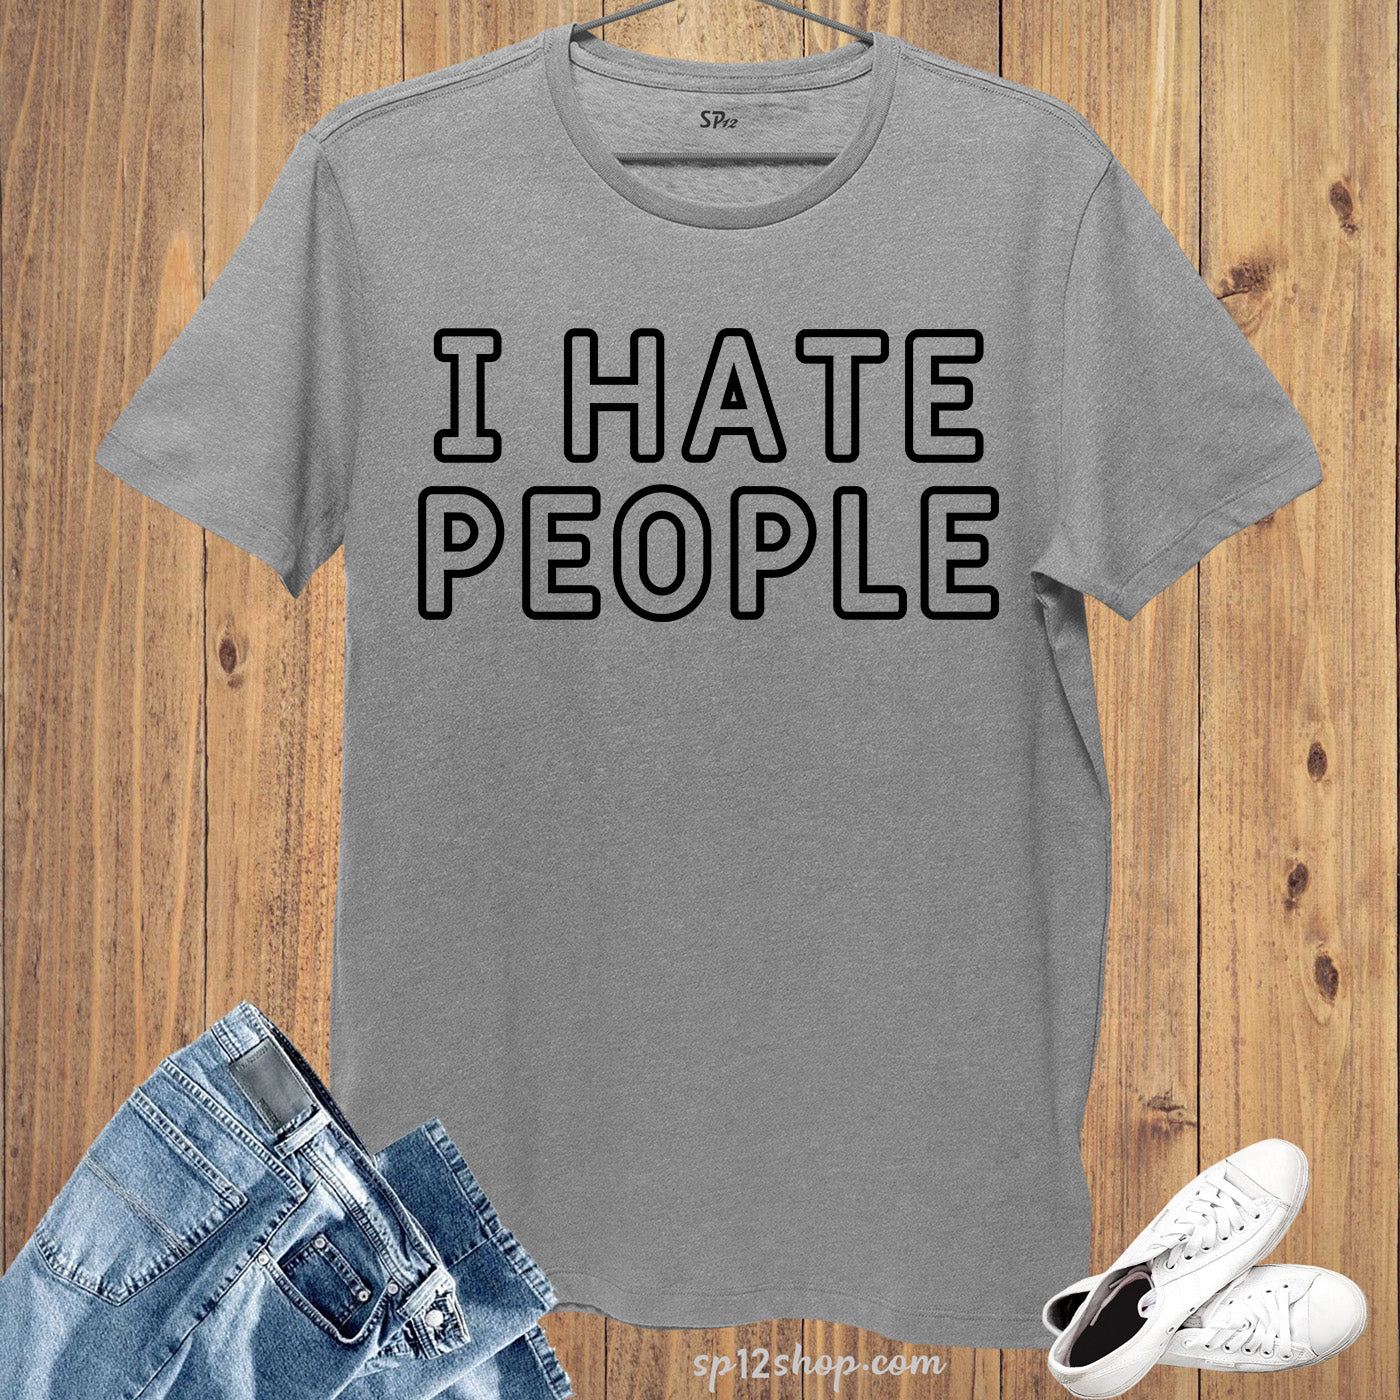 I Hate People Funny T Shirt